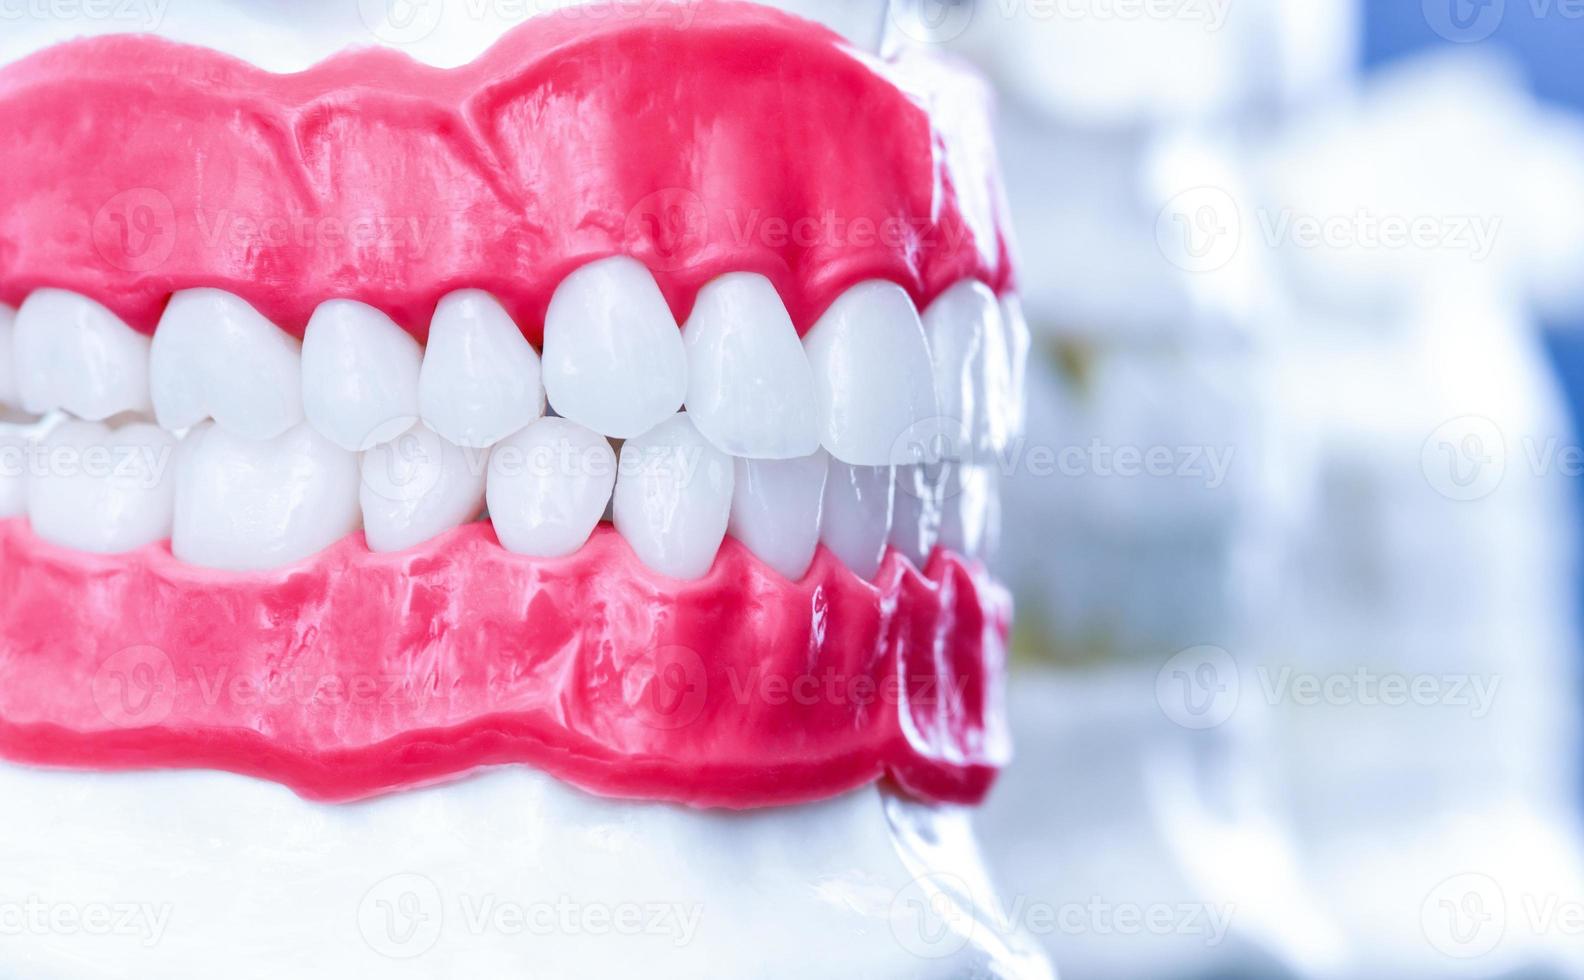 Human jaws with teeth and gums anatomy models photo